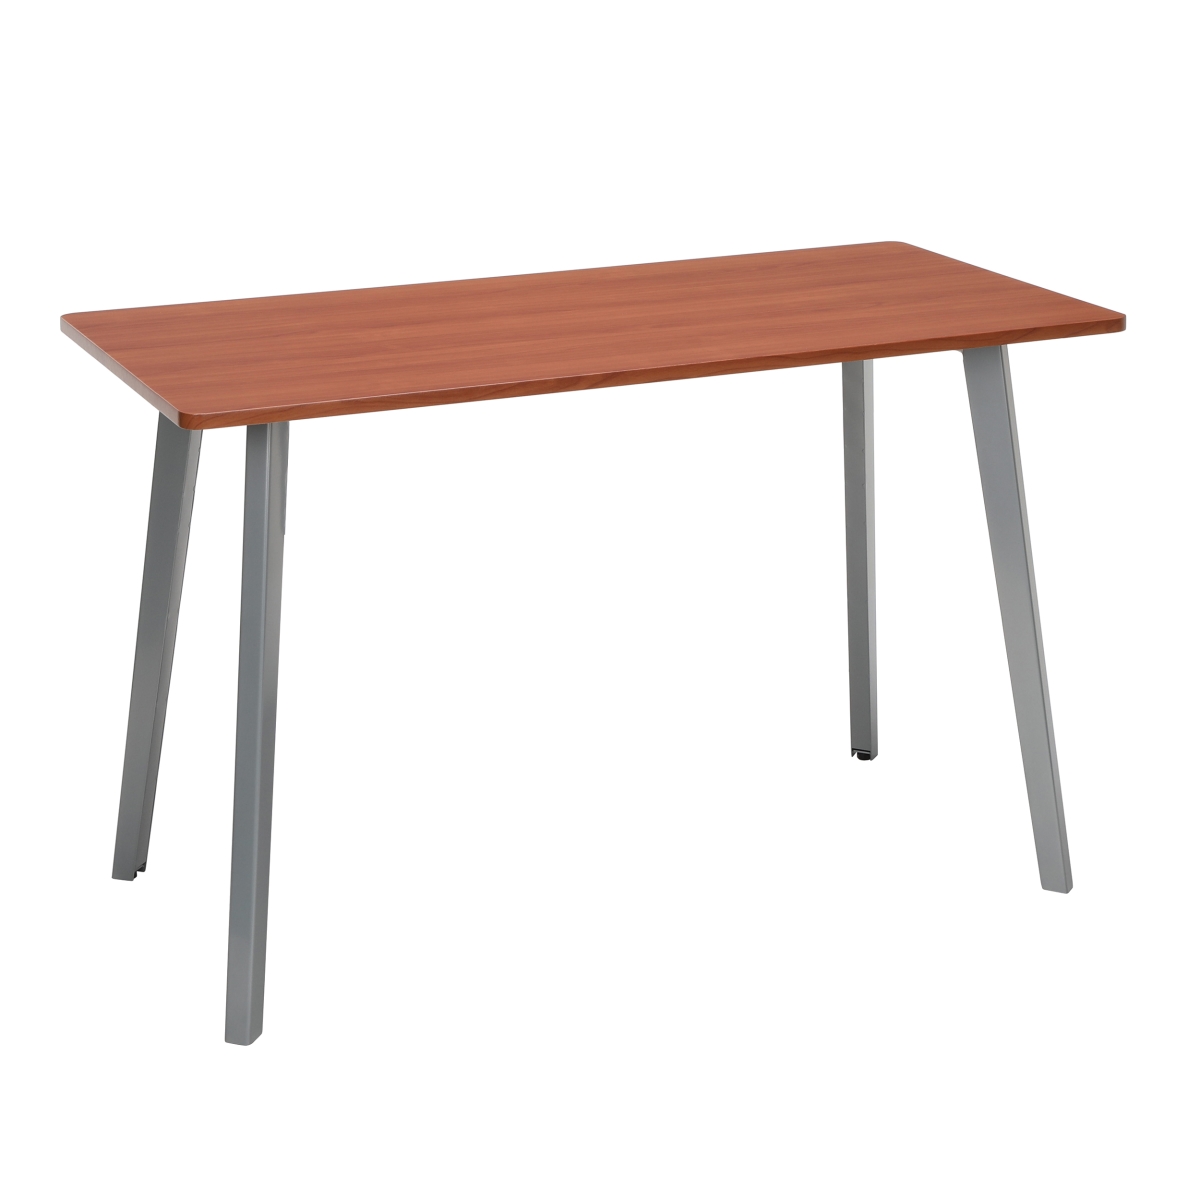 1048-slv-chy 48 In. Core Collection Computer Desk - Cherry